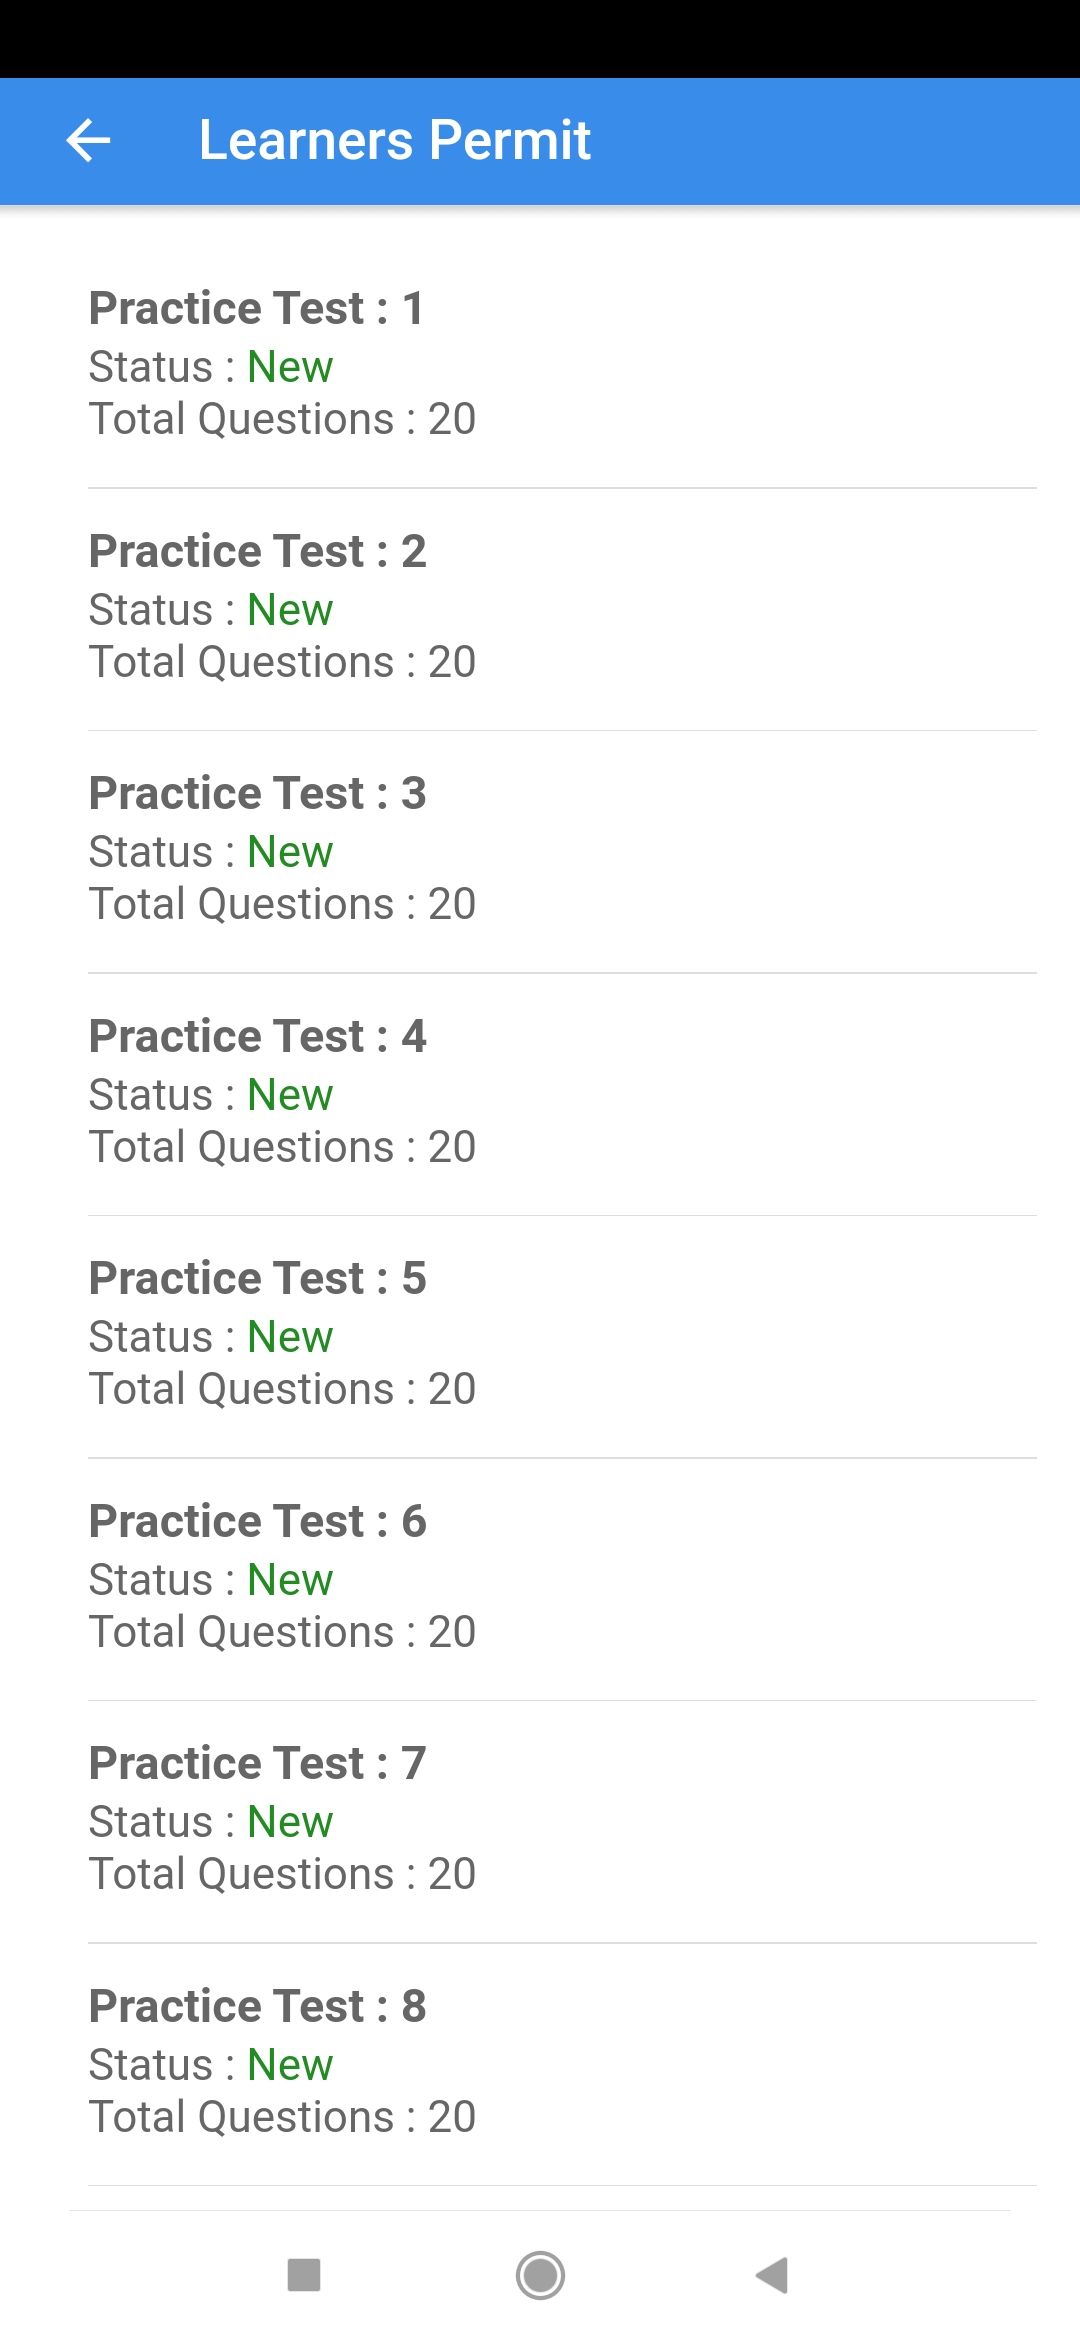 practice test USA app learners permit